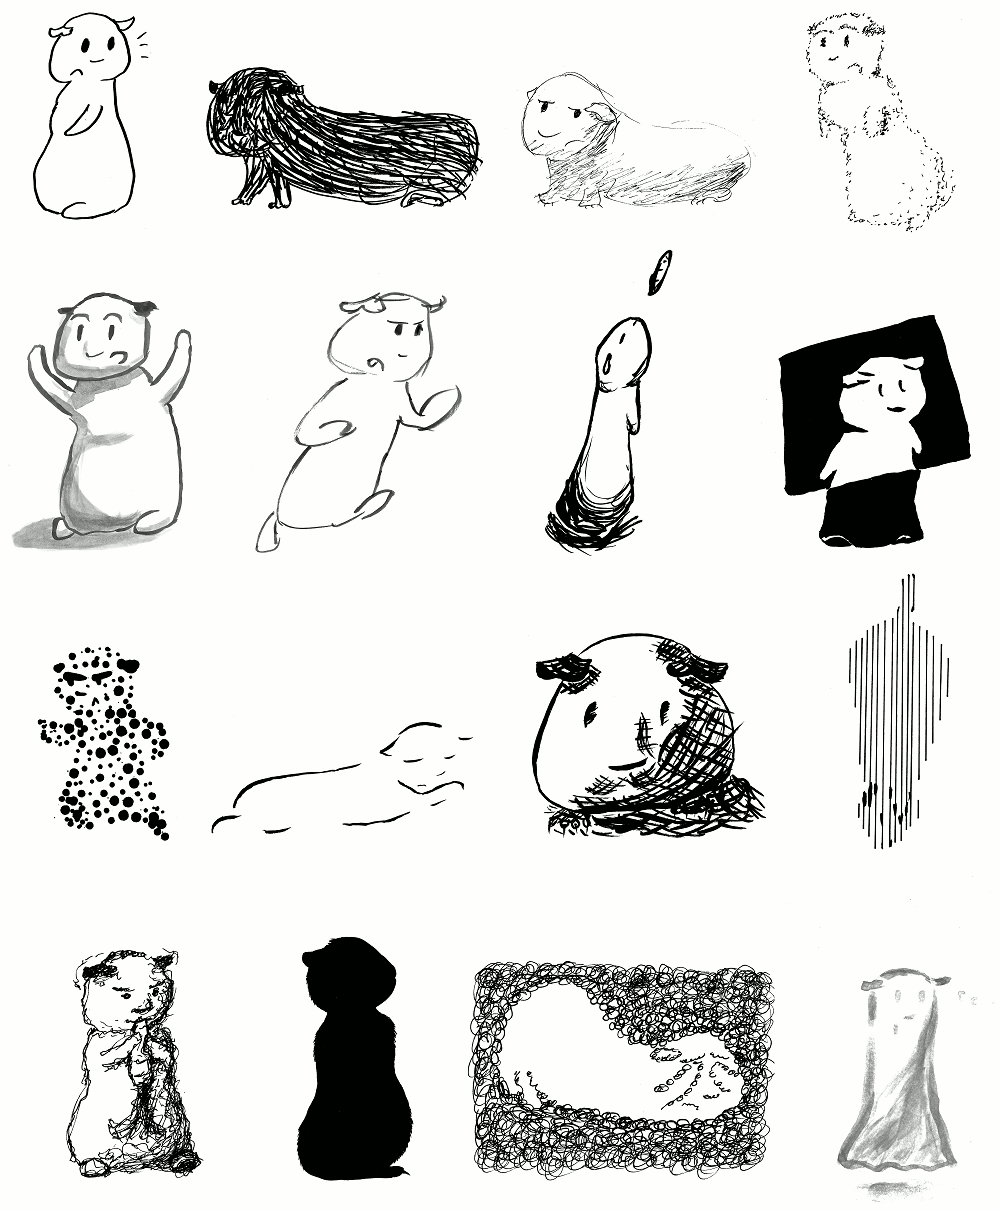 16 Variations on a Guinea Pig